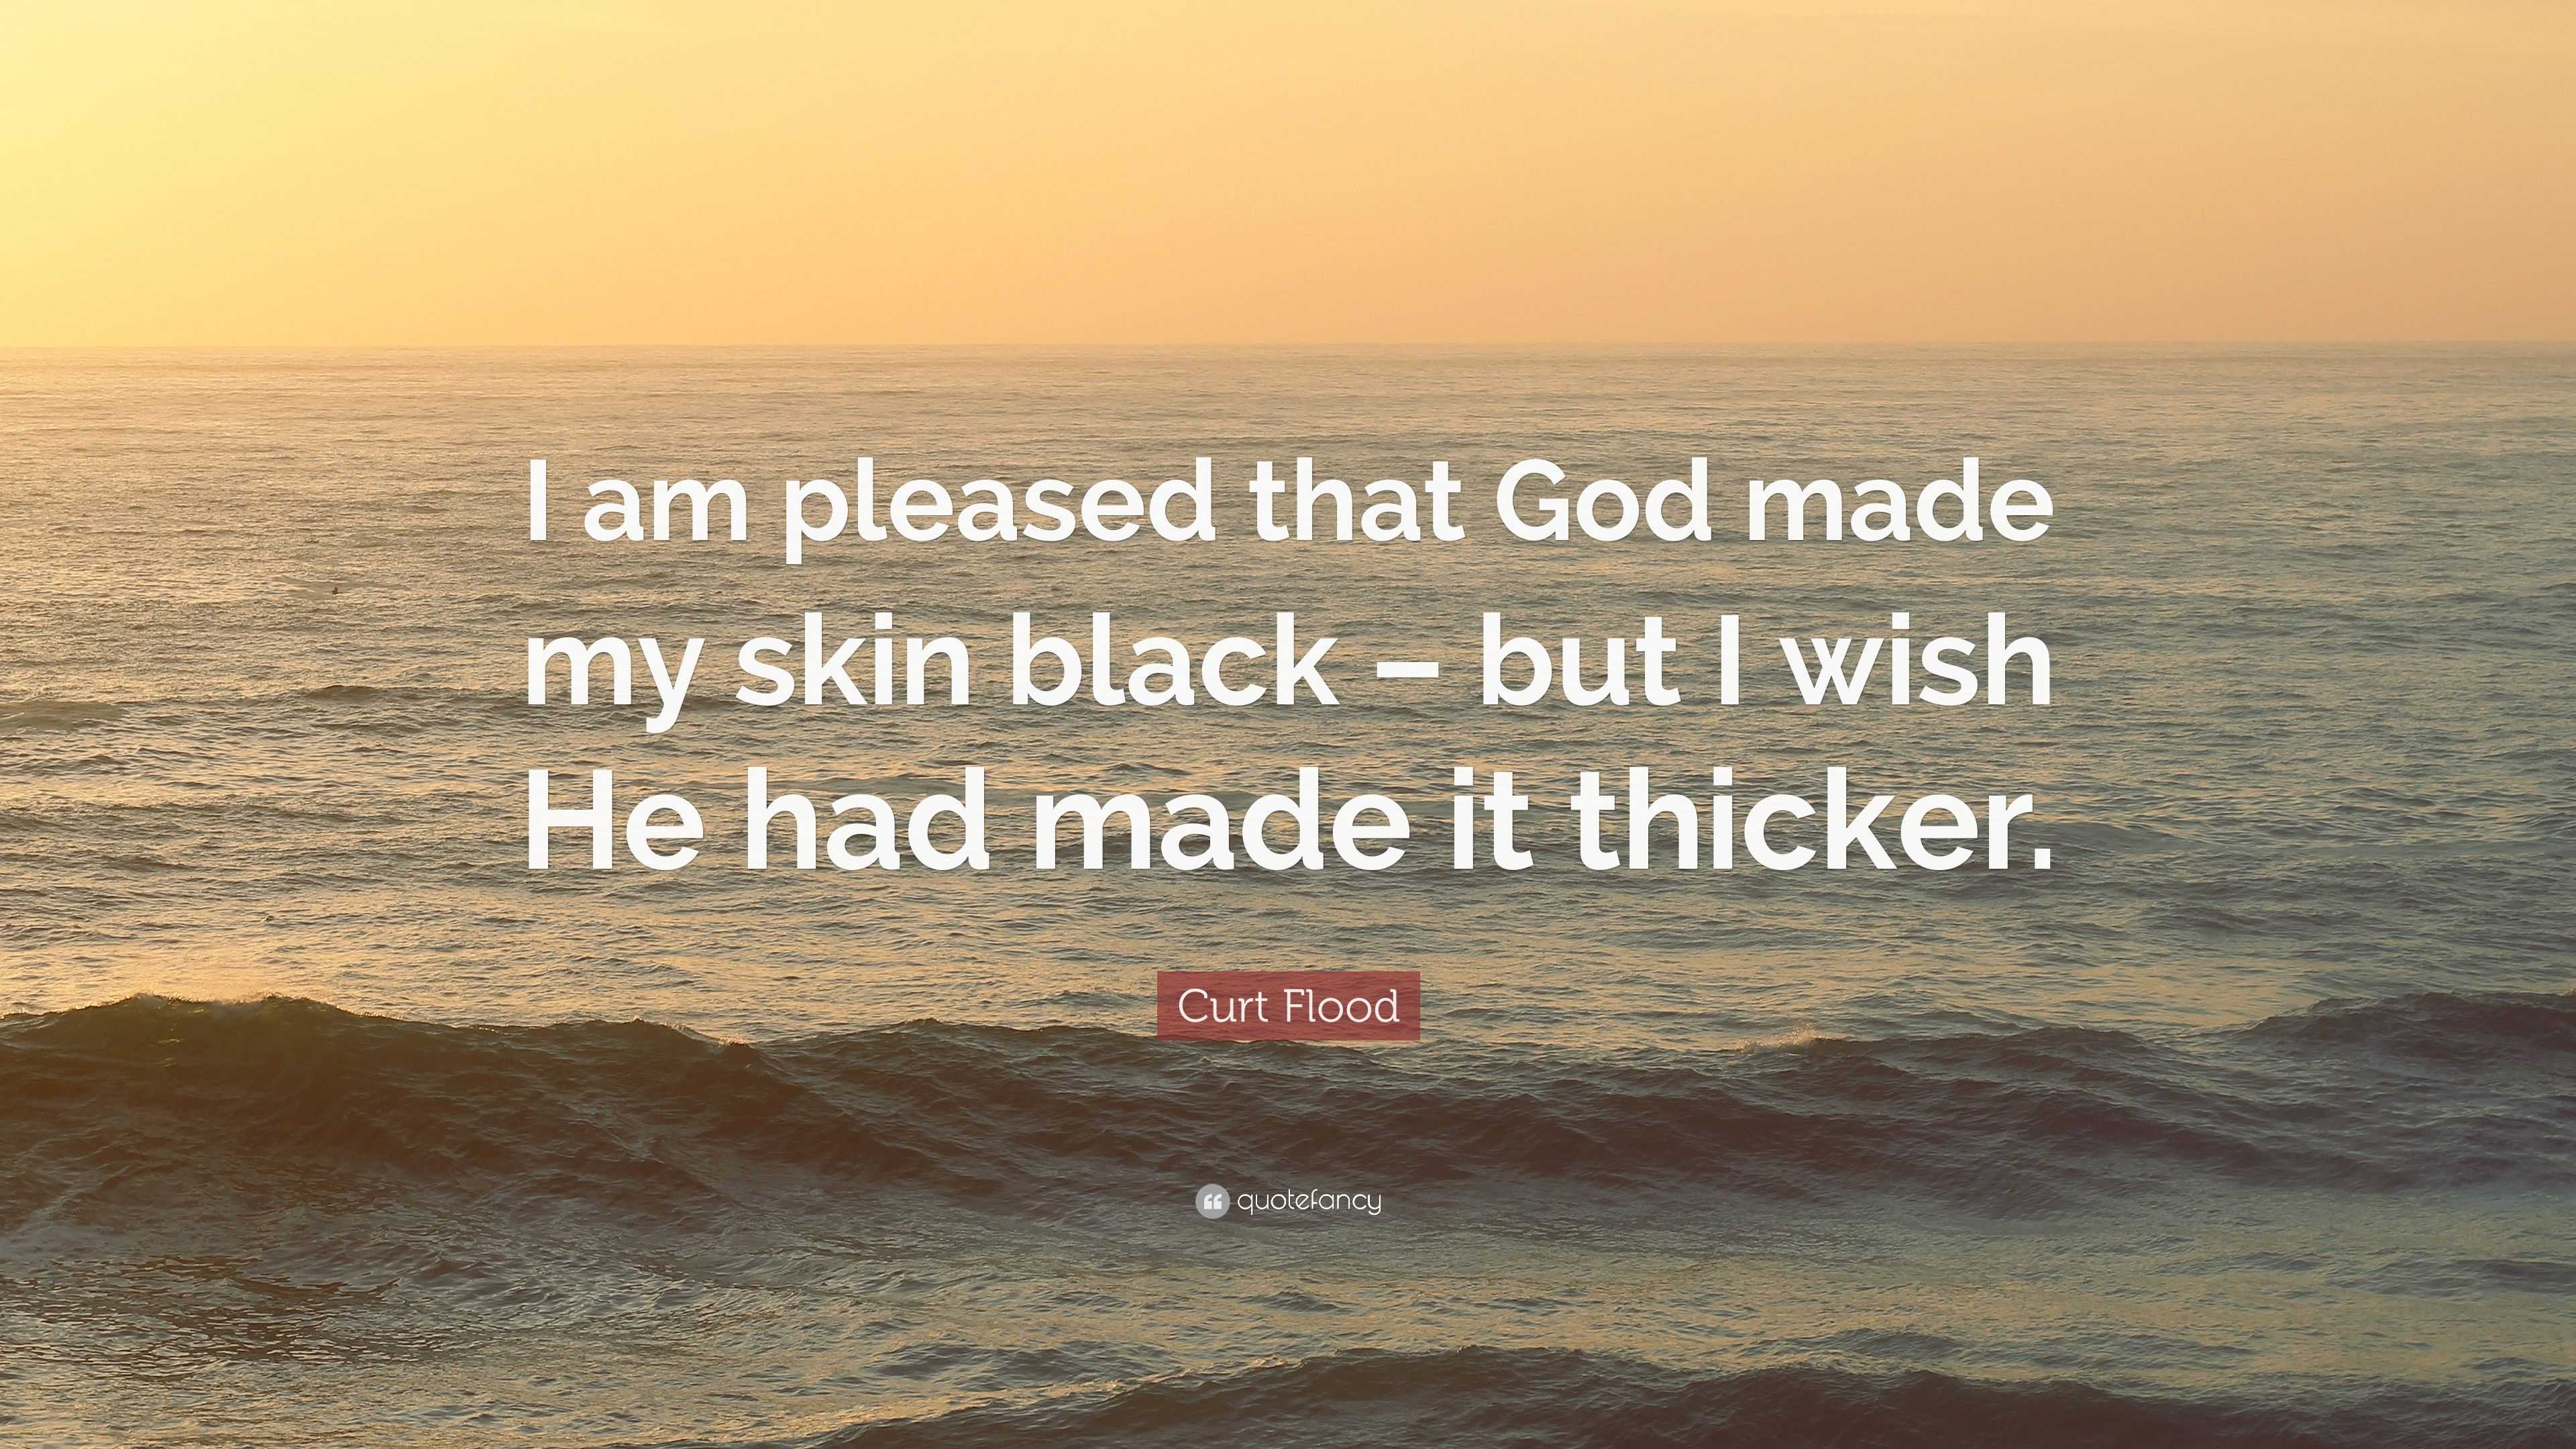 Curt Flood Quote: “I am pleased that God made my skin black – but I